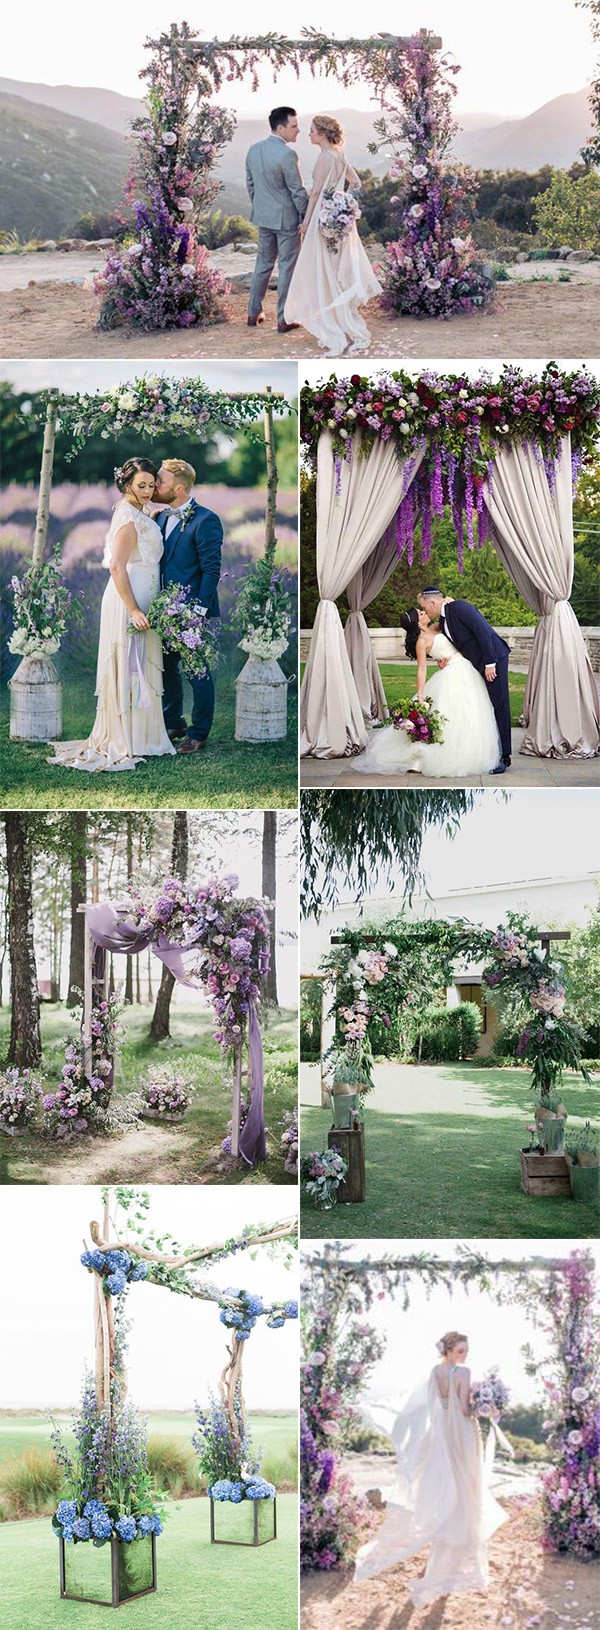 Lavender wedding arch decoration ideas with greenry, dusty blue and light pink shades.